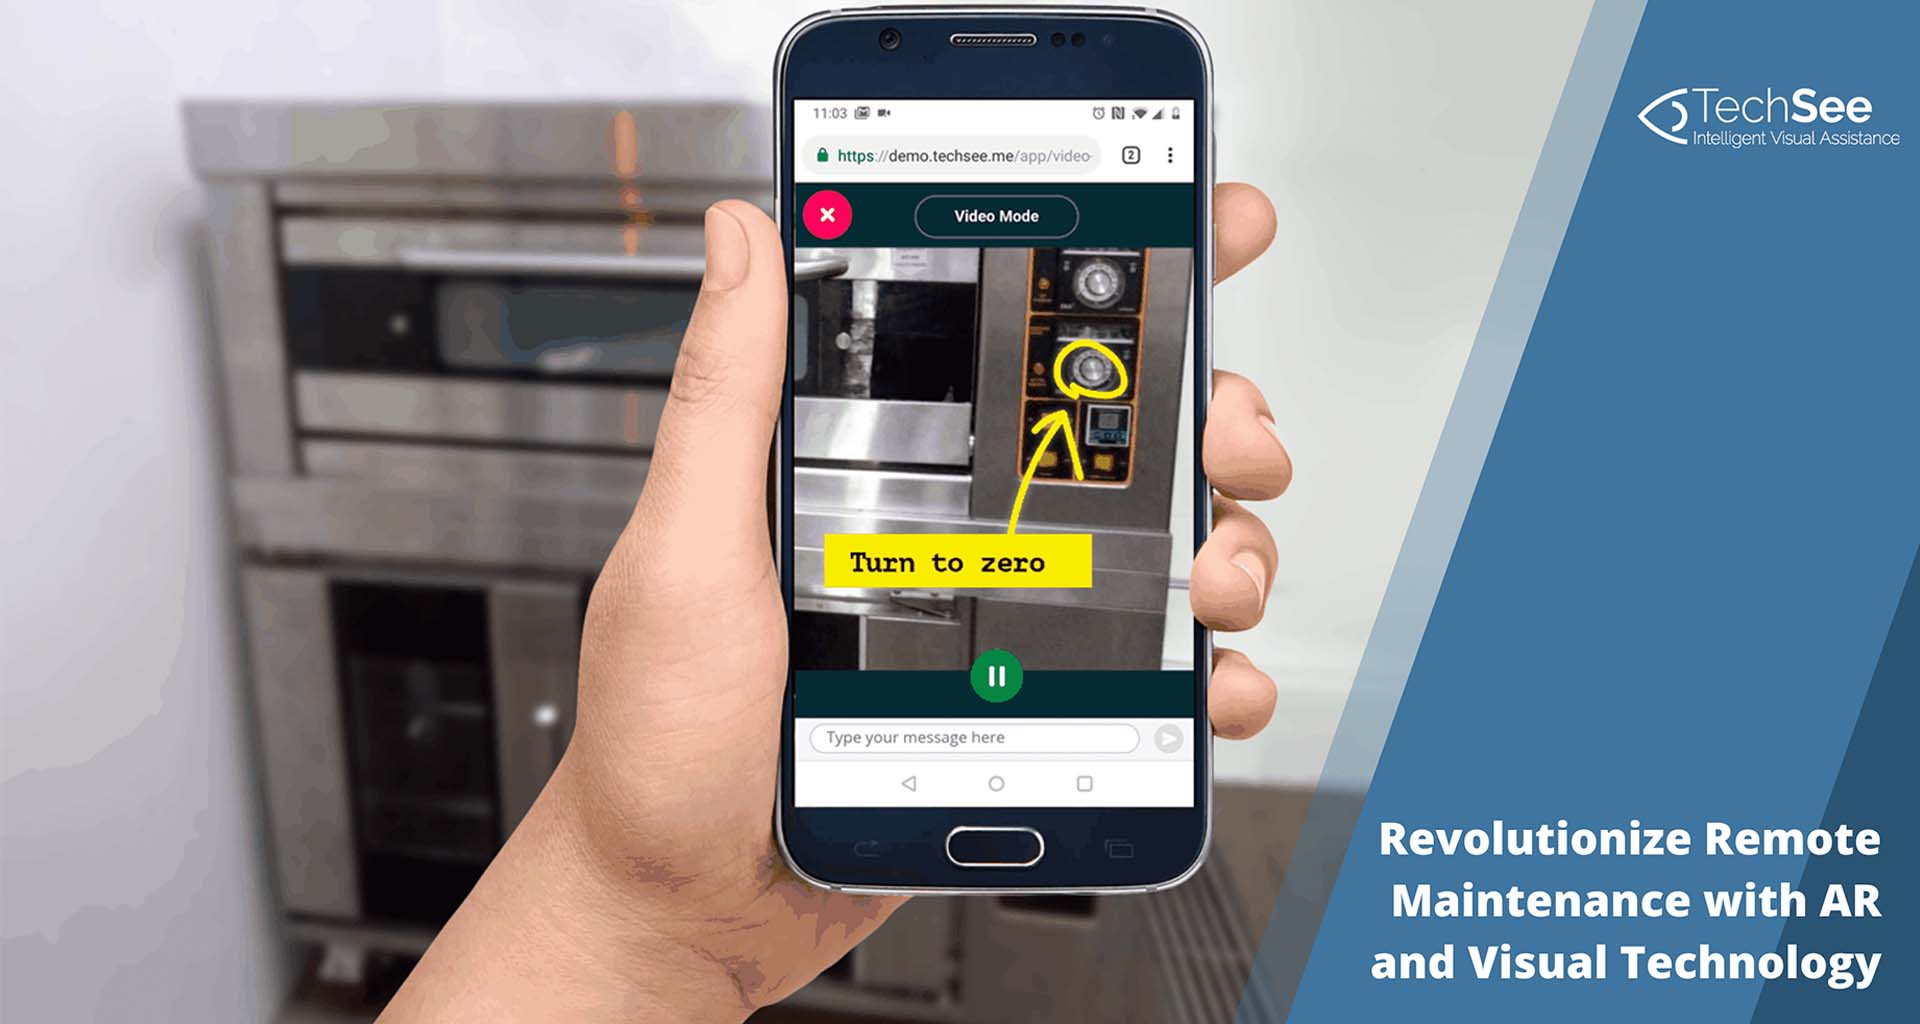 Revolutionize Remote Maintenance with AR and Visual Technology